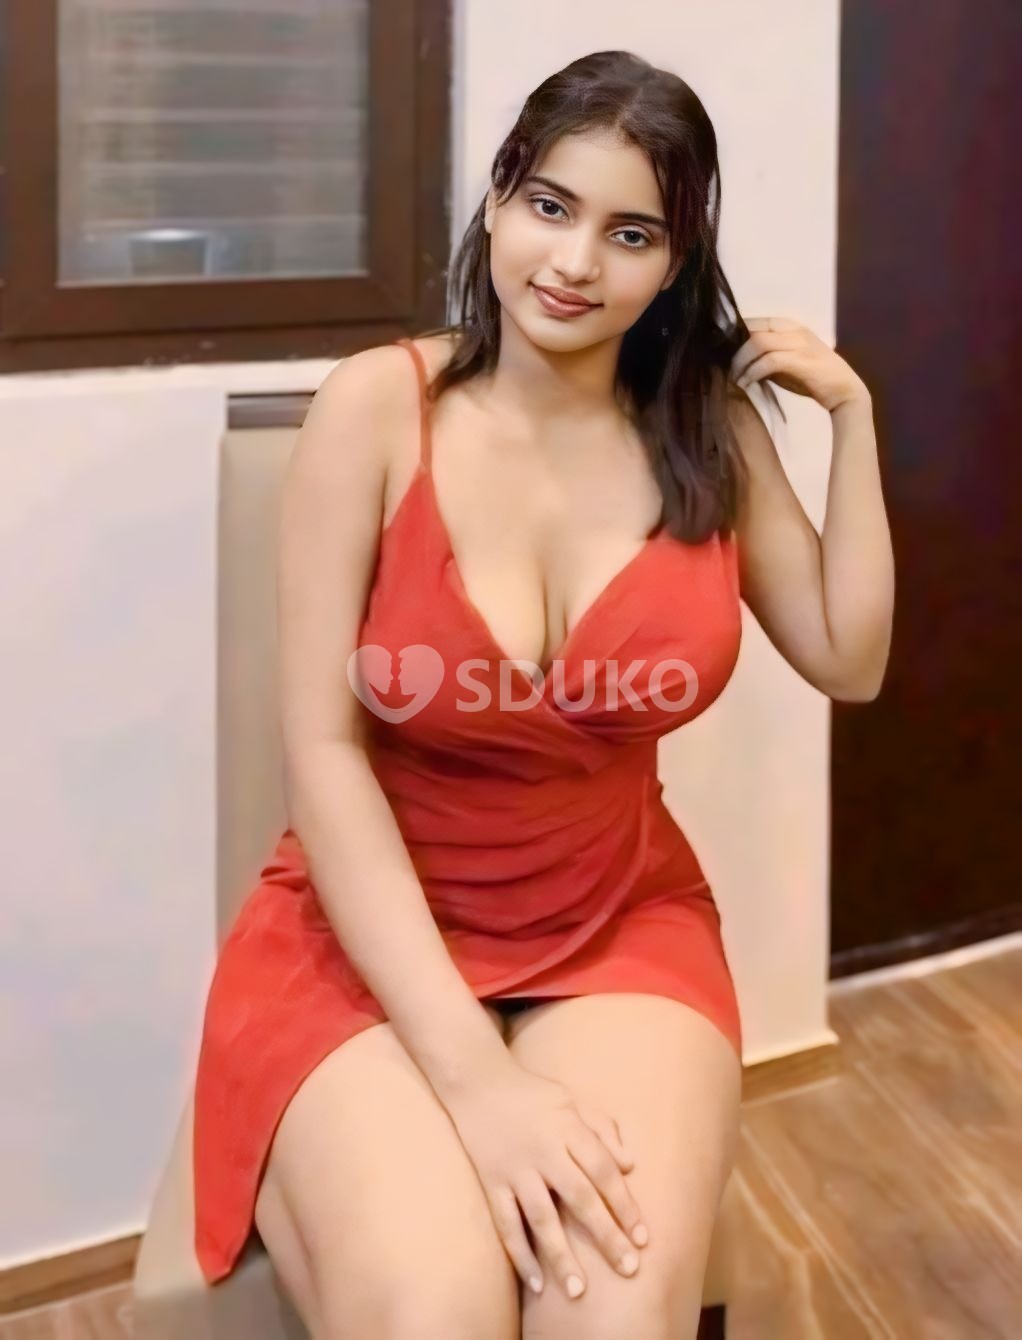 Kukatpally ..❤️❤️MYSELF SWETA CALL GIRL & BODY-2-BODY MASSAGE SPA SERVICES OUTCALL OUTCALL INCALL 24 HOURS WHATS